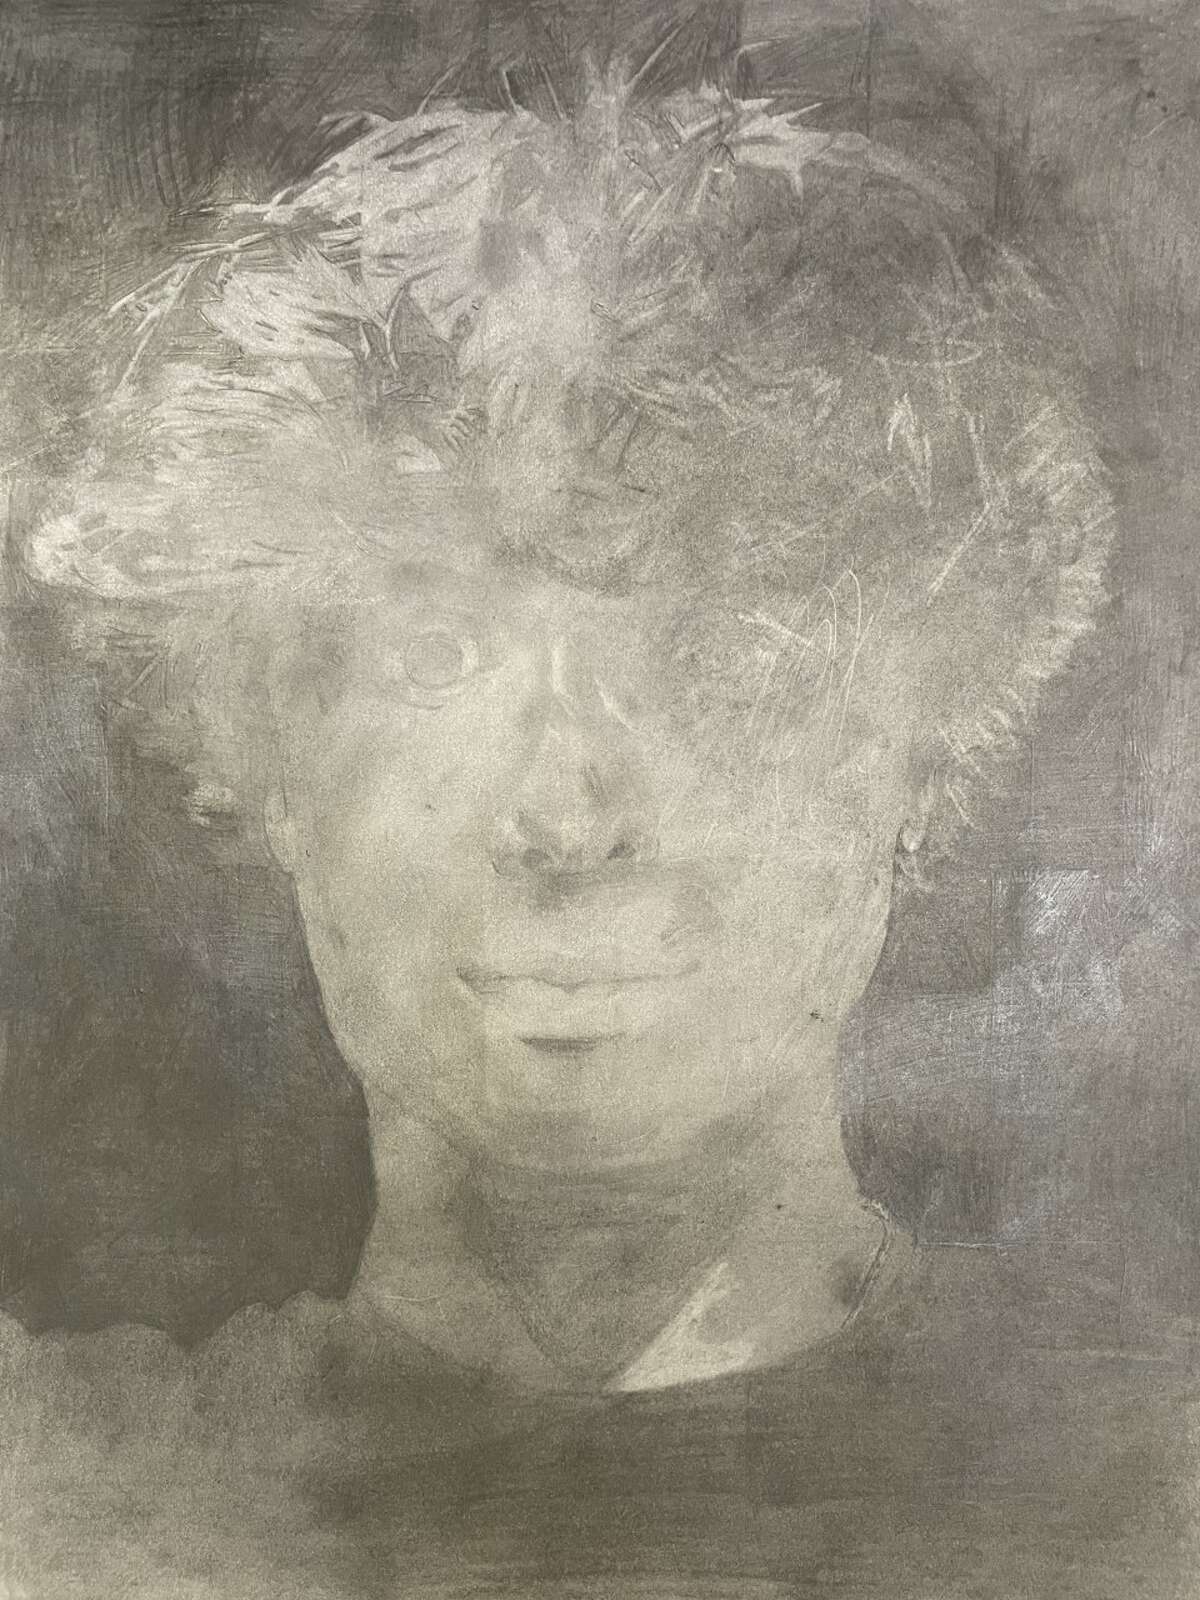 Emmerson Farmer won an honorable mention for a self portrait "shadow," which was entered into the 2022 West Central Michigan Regional Scholastic Art & Writing Competition.